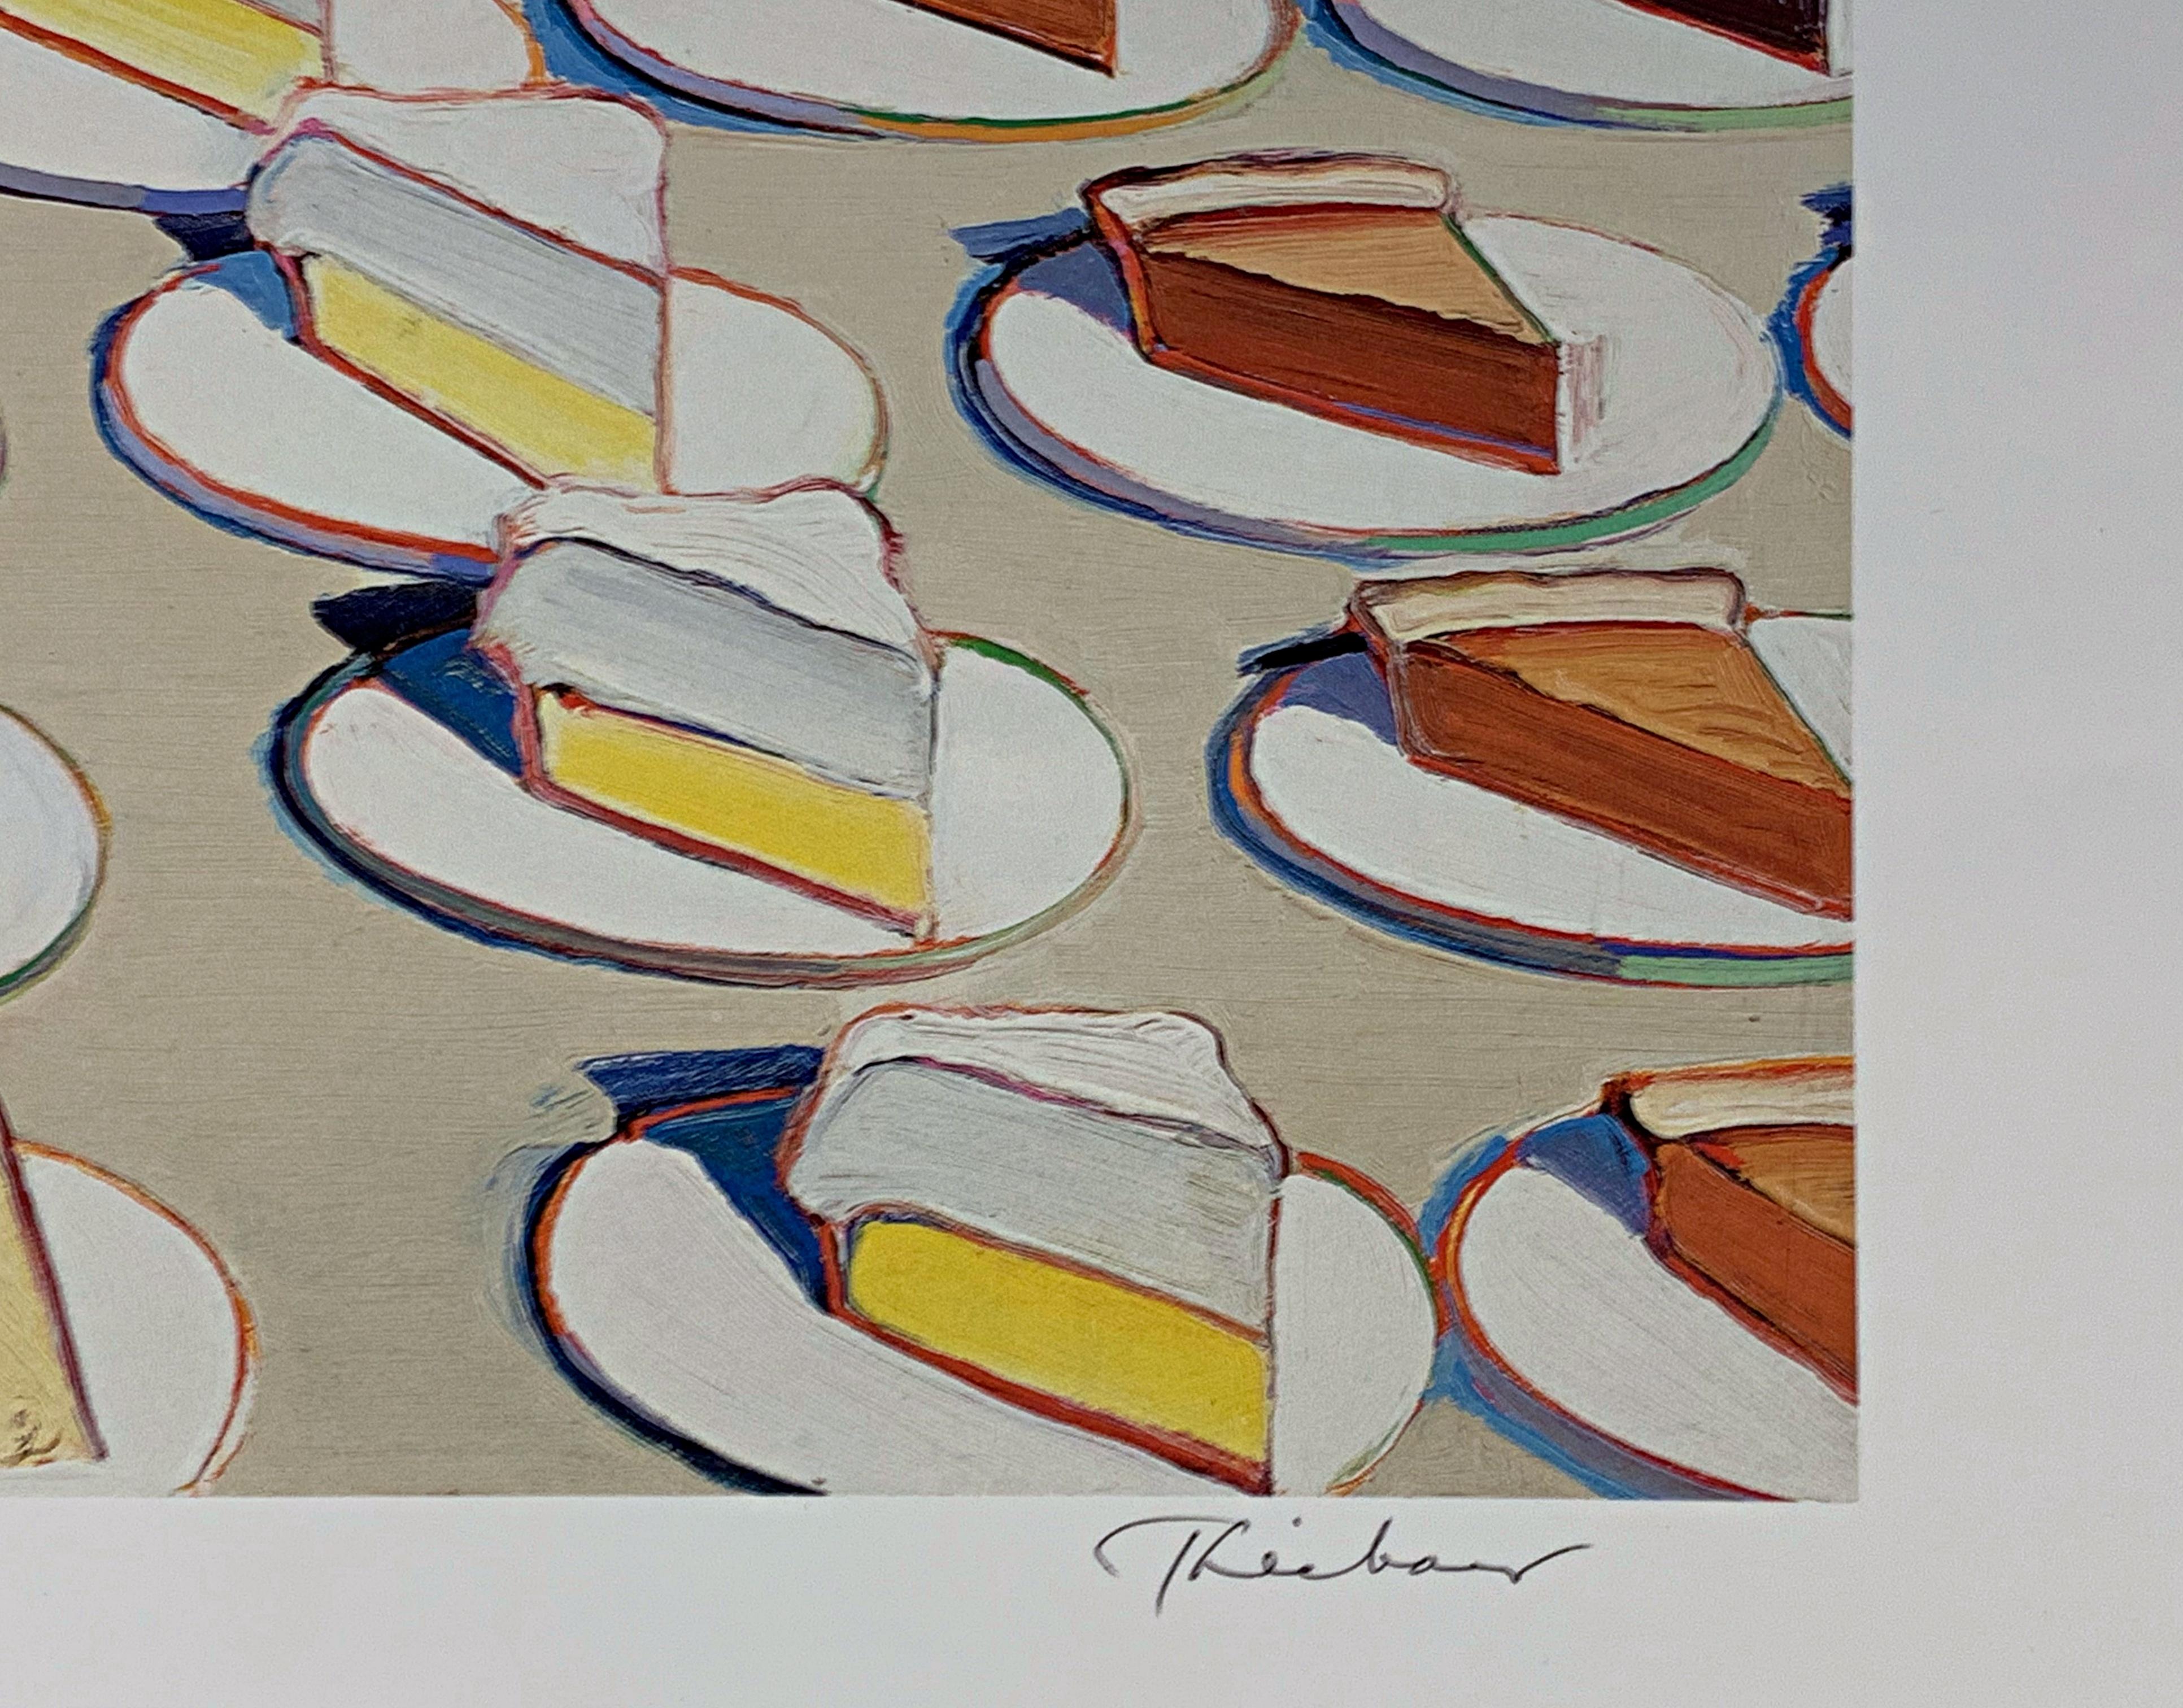 Wayne Thiebaud
Pie Counter, 1963 (Hand Signed), 2008
Offset lithograph poster (Hand signed by Wayne Thiebaud)
Boldly signed by the artist in black marker on the front
16 × 20 inches
Unframed
This hand signed work was donated directly by the artist